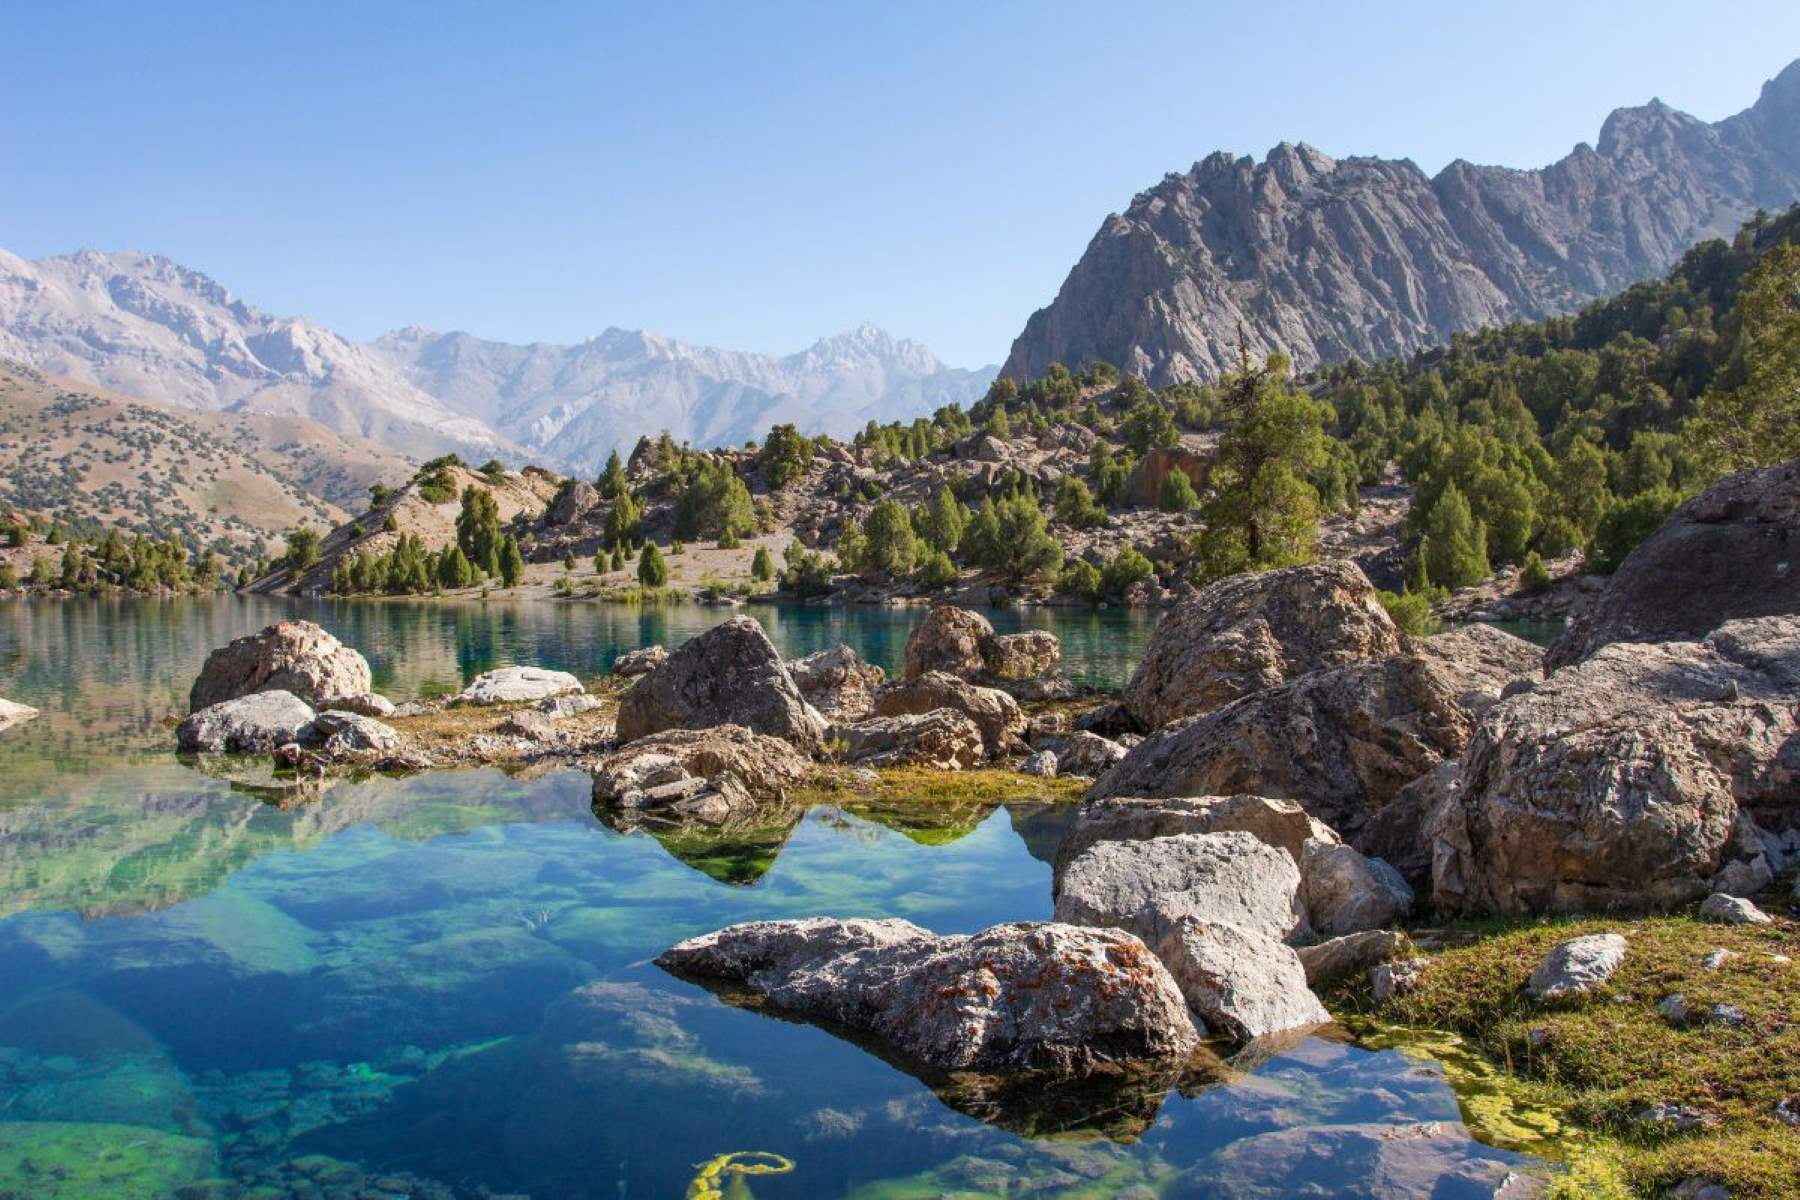 a-guide-for-traveling-to-tajikistan-tips-3-week-itinerary